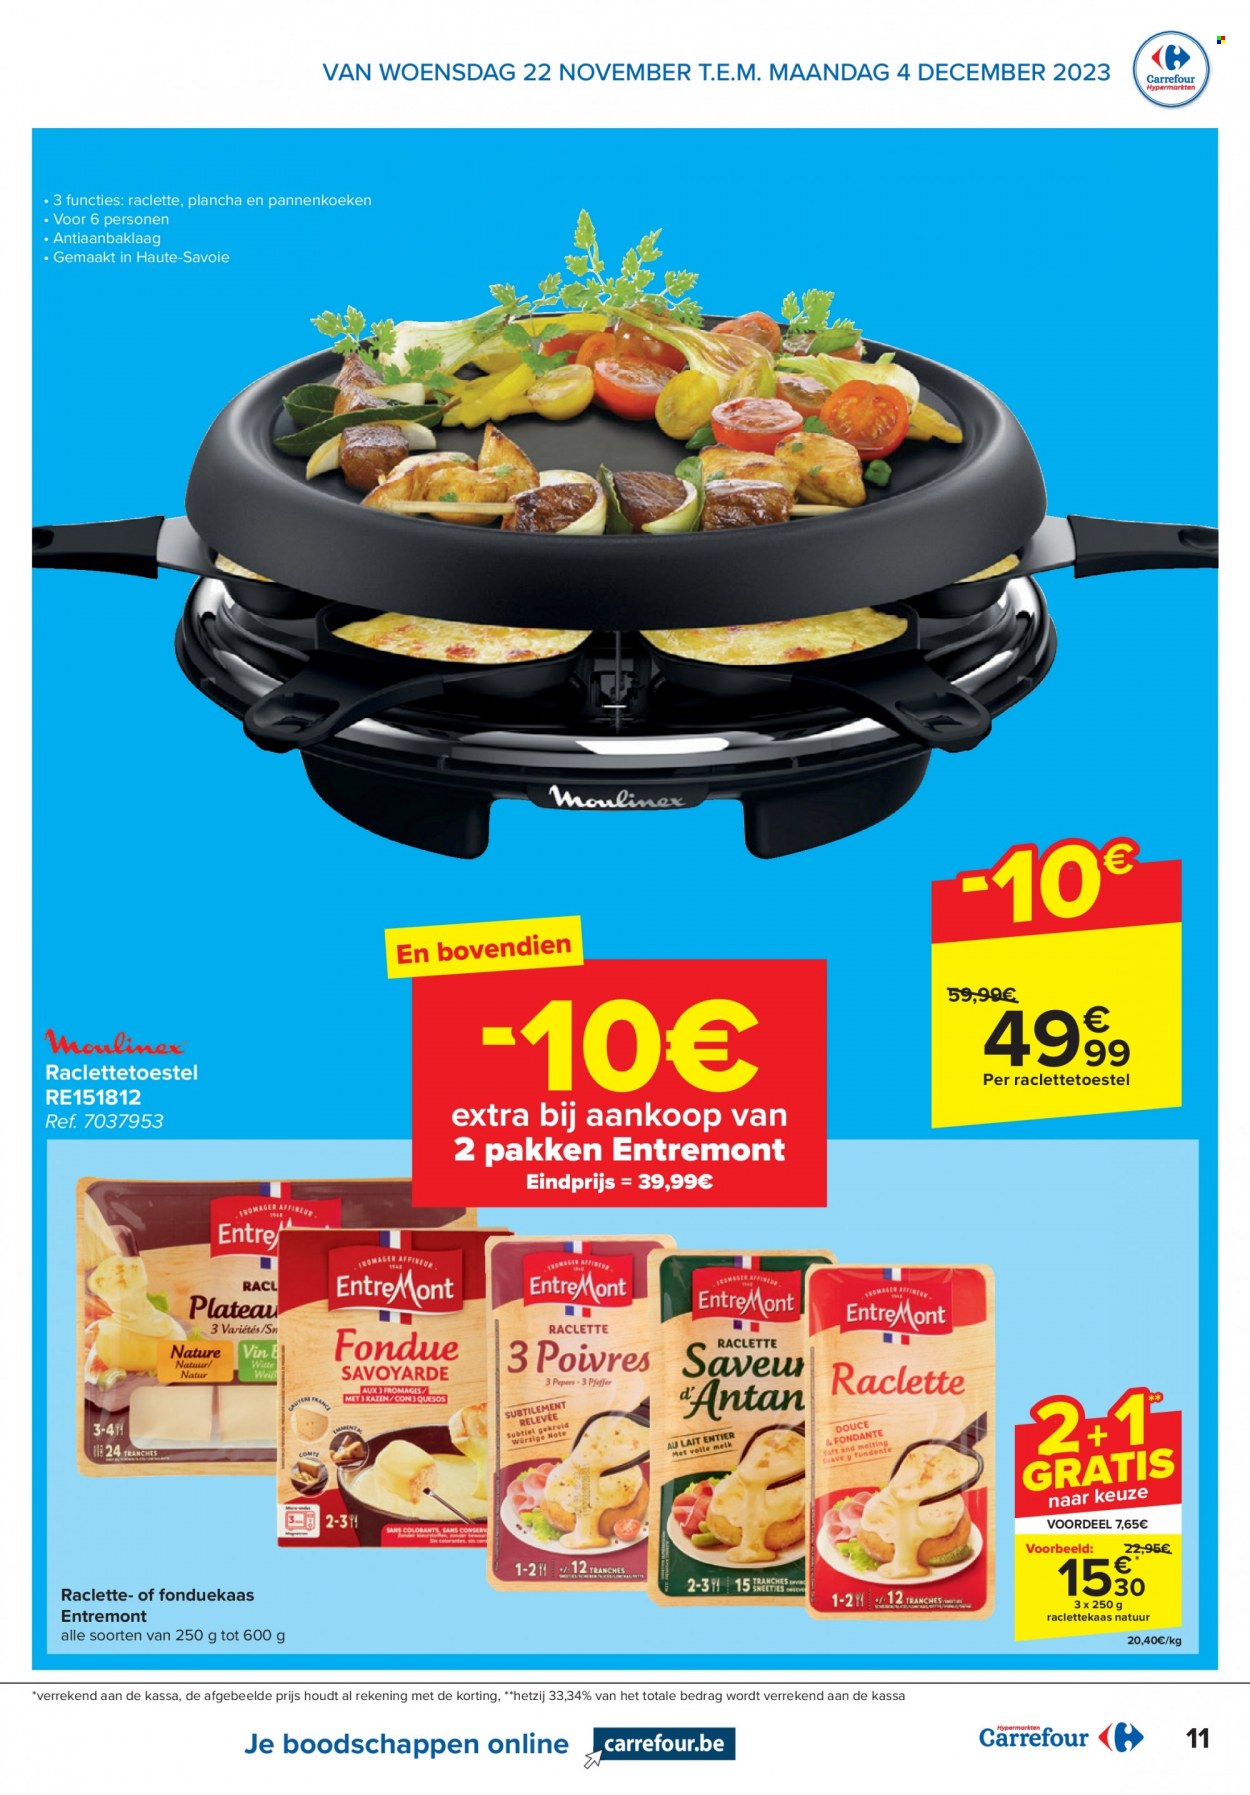 Catalogue Carrefour hypermarkt - 22.11.2023 - 4.12.2023. Page 11.